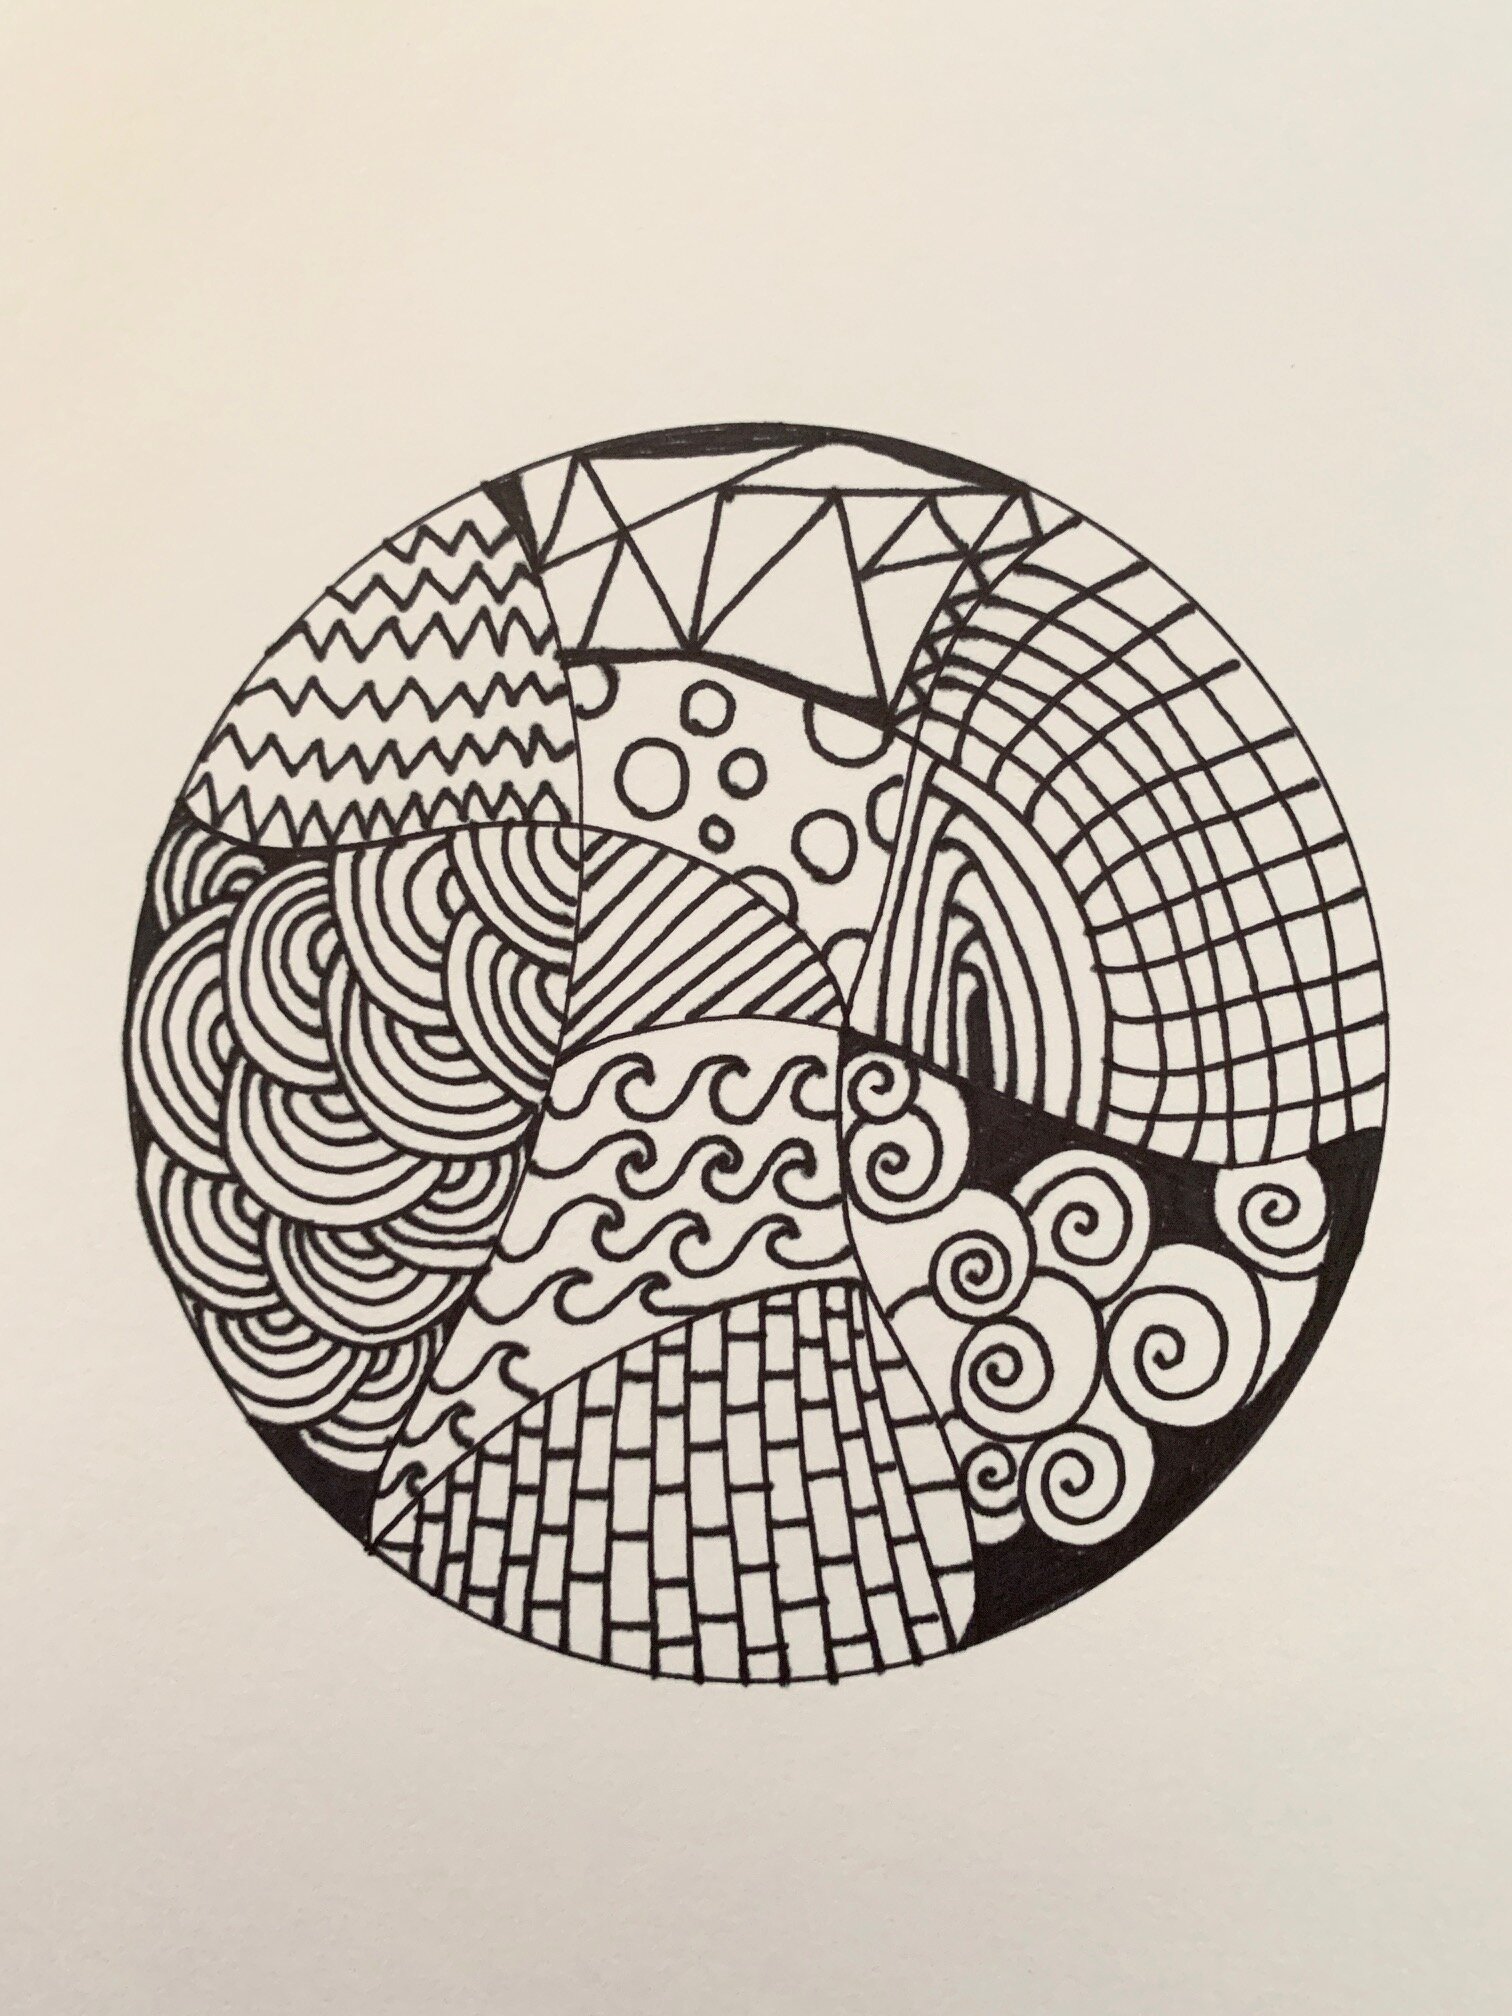 Zentangle - Lesson 101. Only with a pencil and a drawing pen, by Mike, Art Lovers Welcome